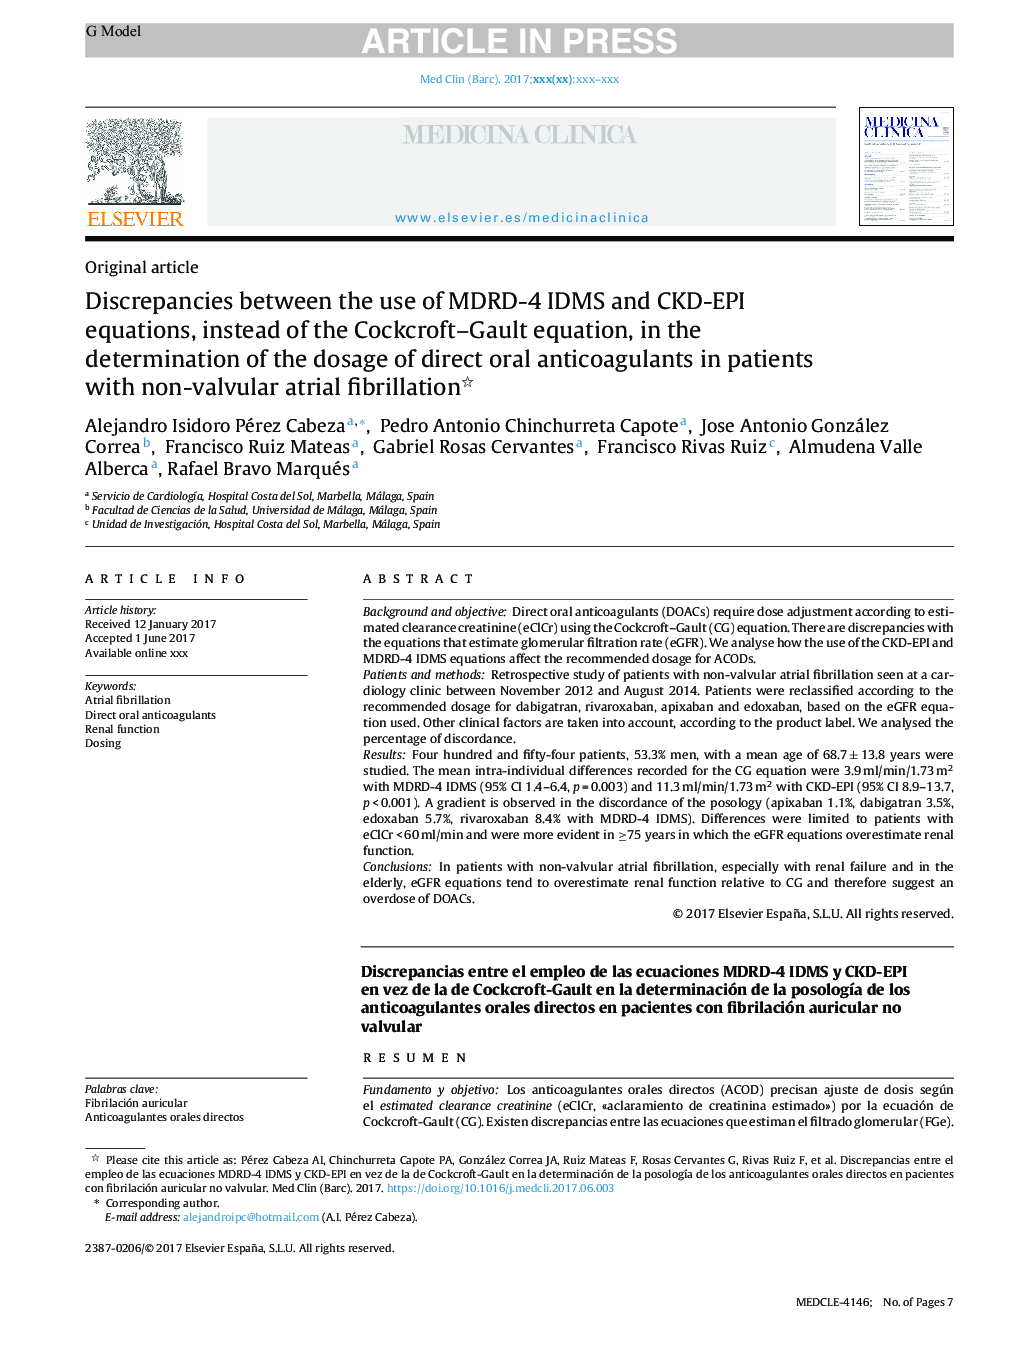 Discrepancies between the use of MDRD-4 IDMS and CKD-EPI equations, instead of the Cockcroft-Gault equation, in the determination of the dosage of direct oral anticoagulants in patients with non-valvular atrial fibrillation